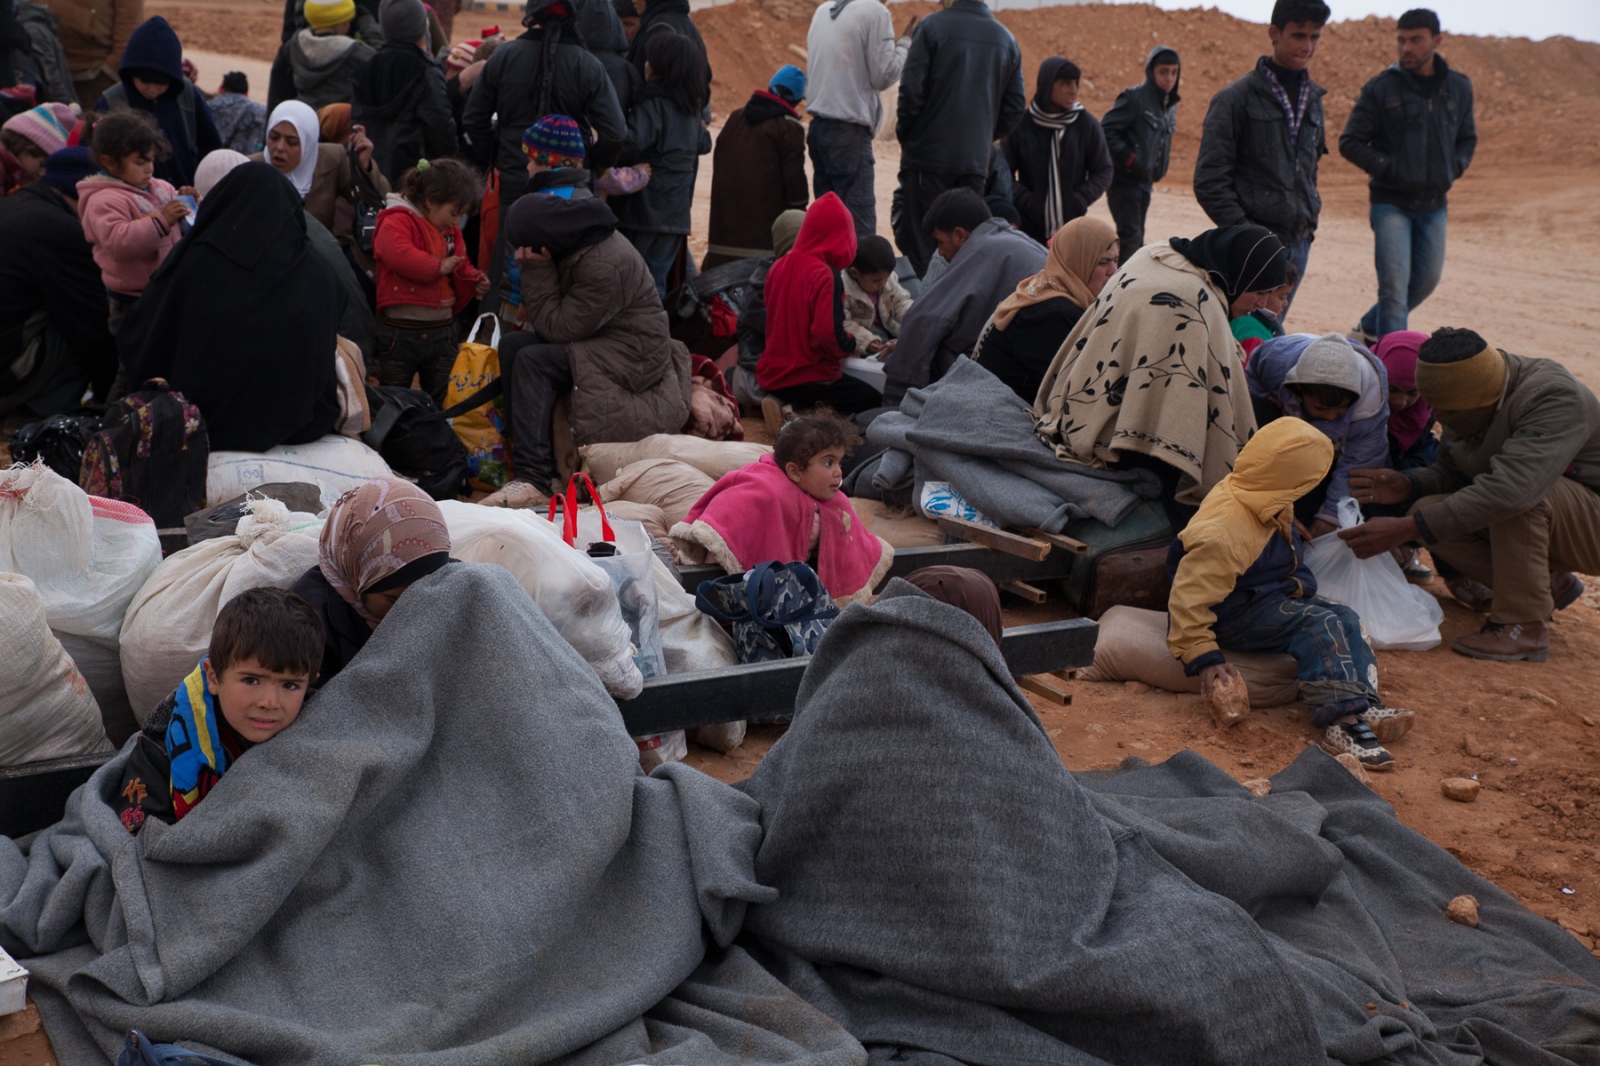 The Syrian Refugee Crisis - These refugees traveled for days to get to the Syrian...